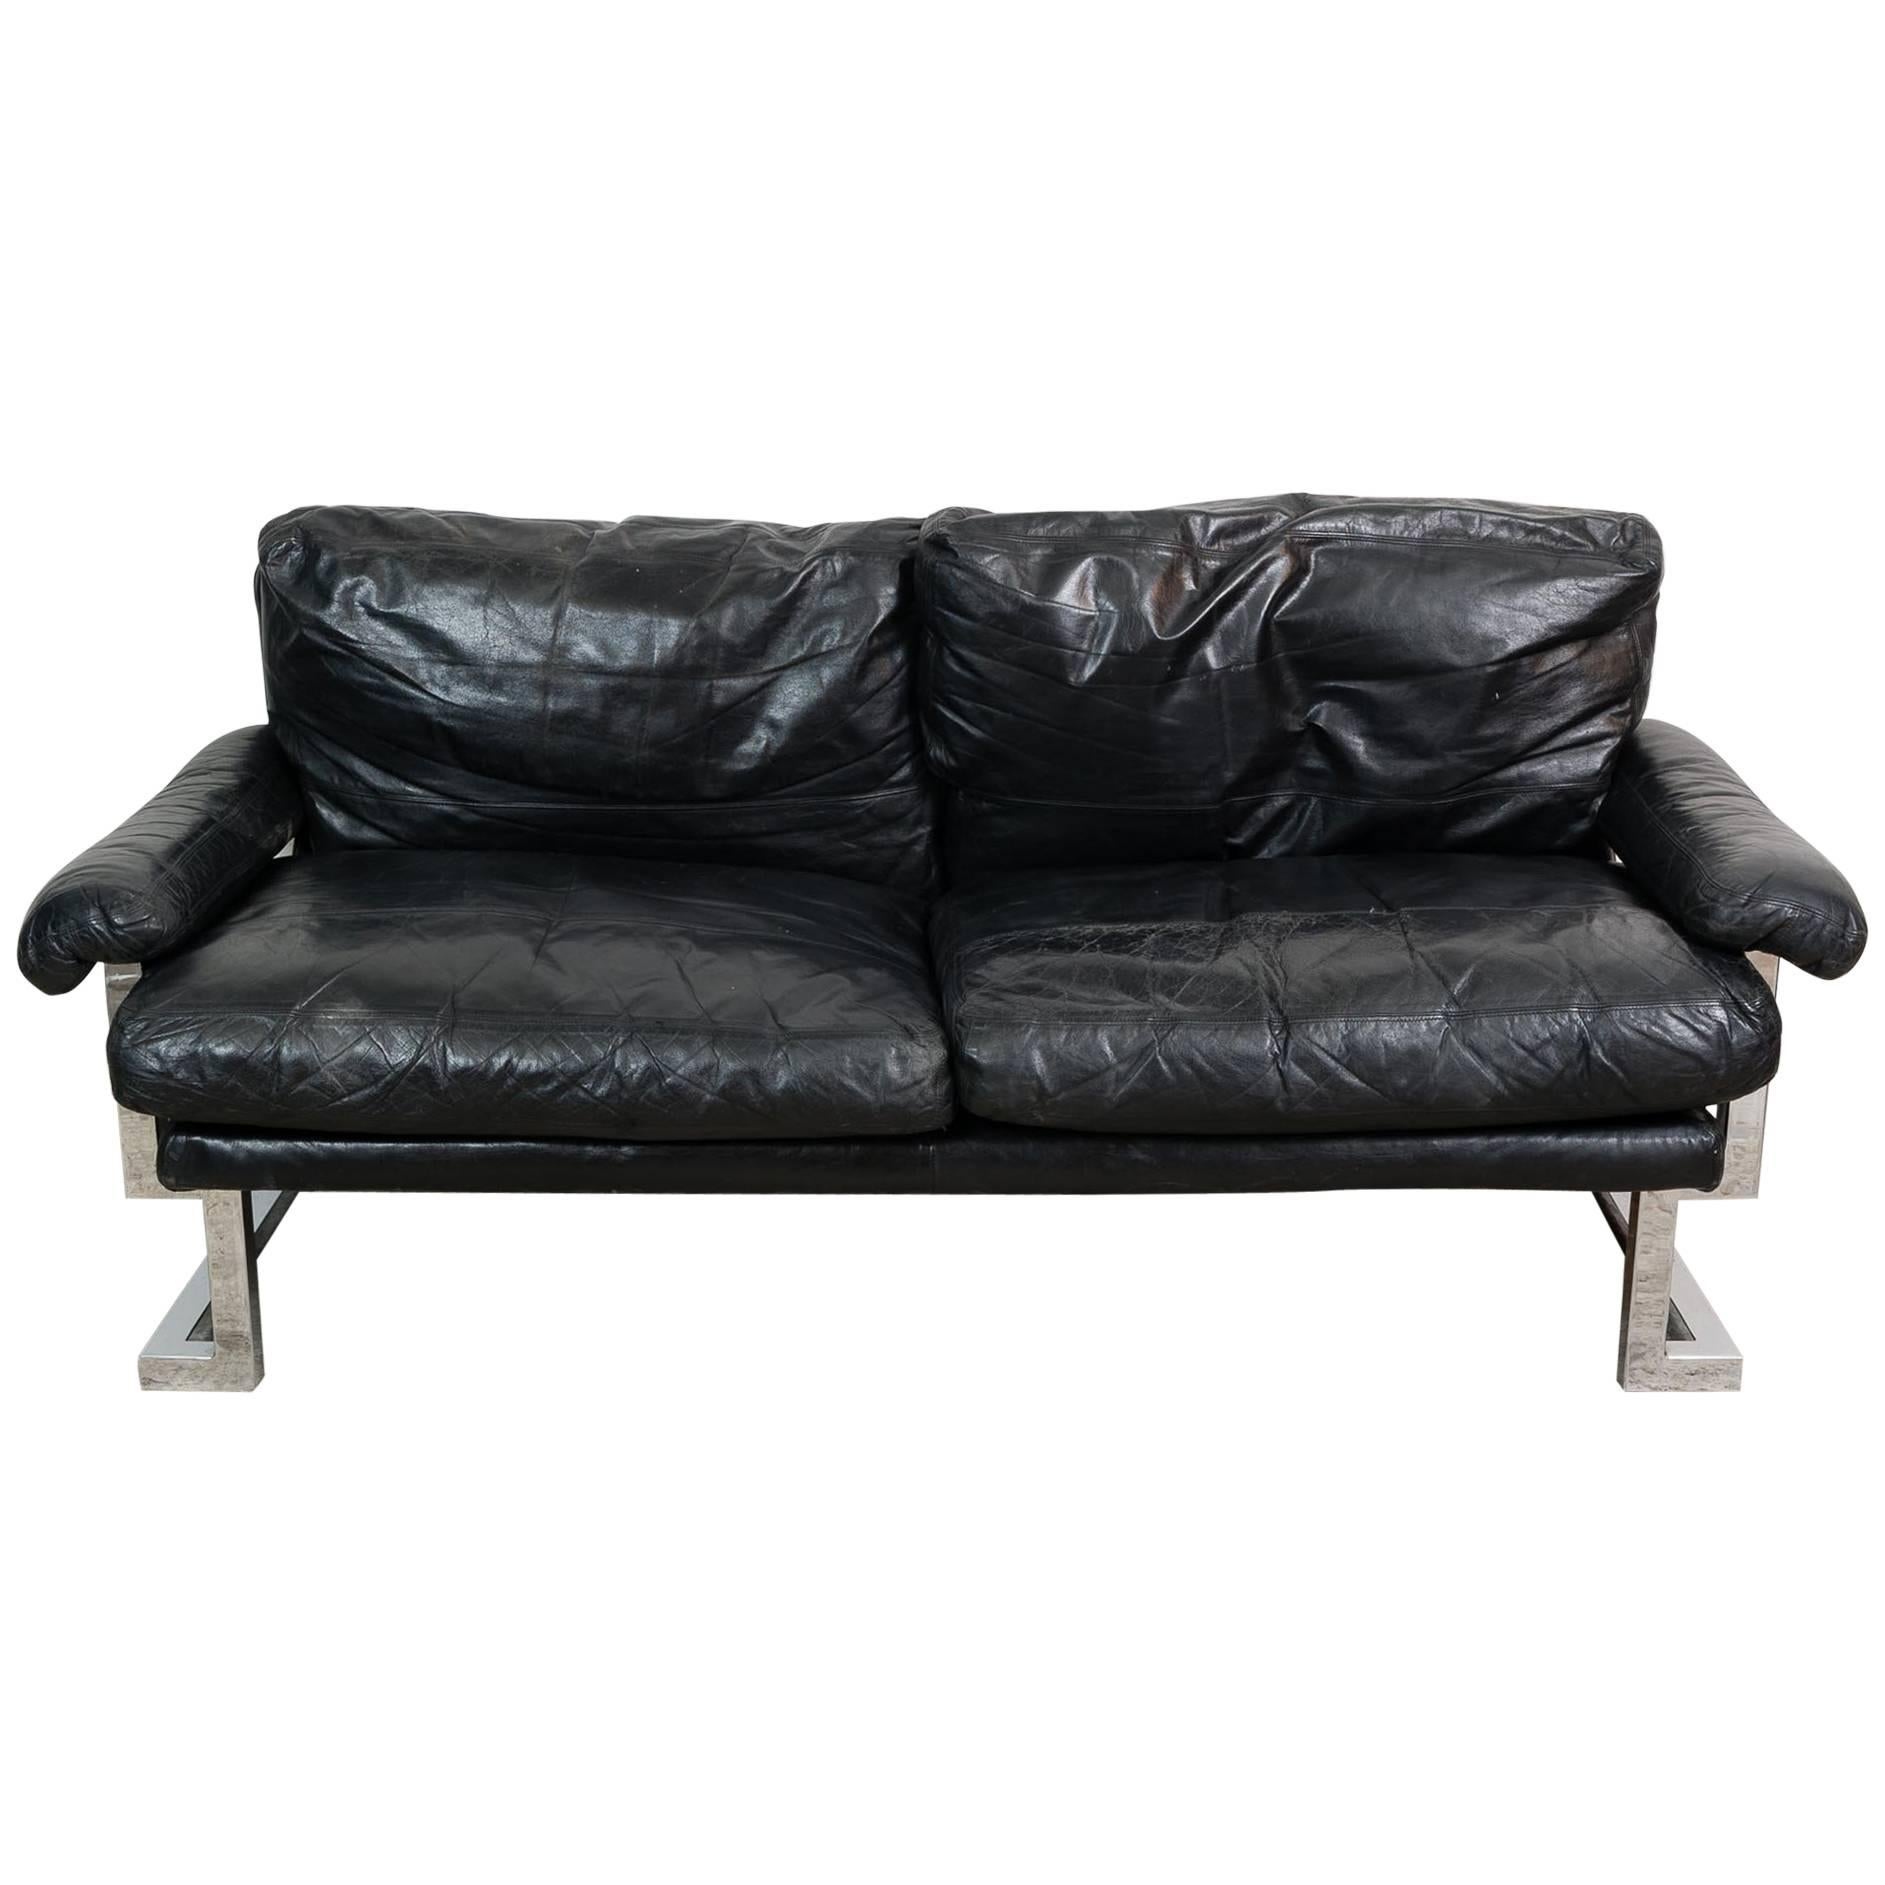 1970s Pieff Midcentury Mandarin Sofa in Chrome and Black Leather by Ted Bates